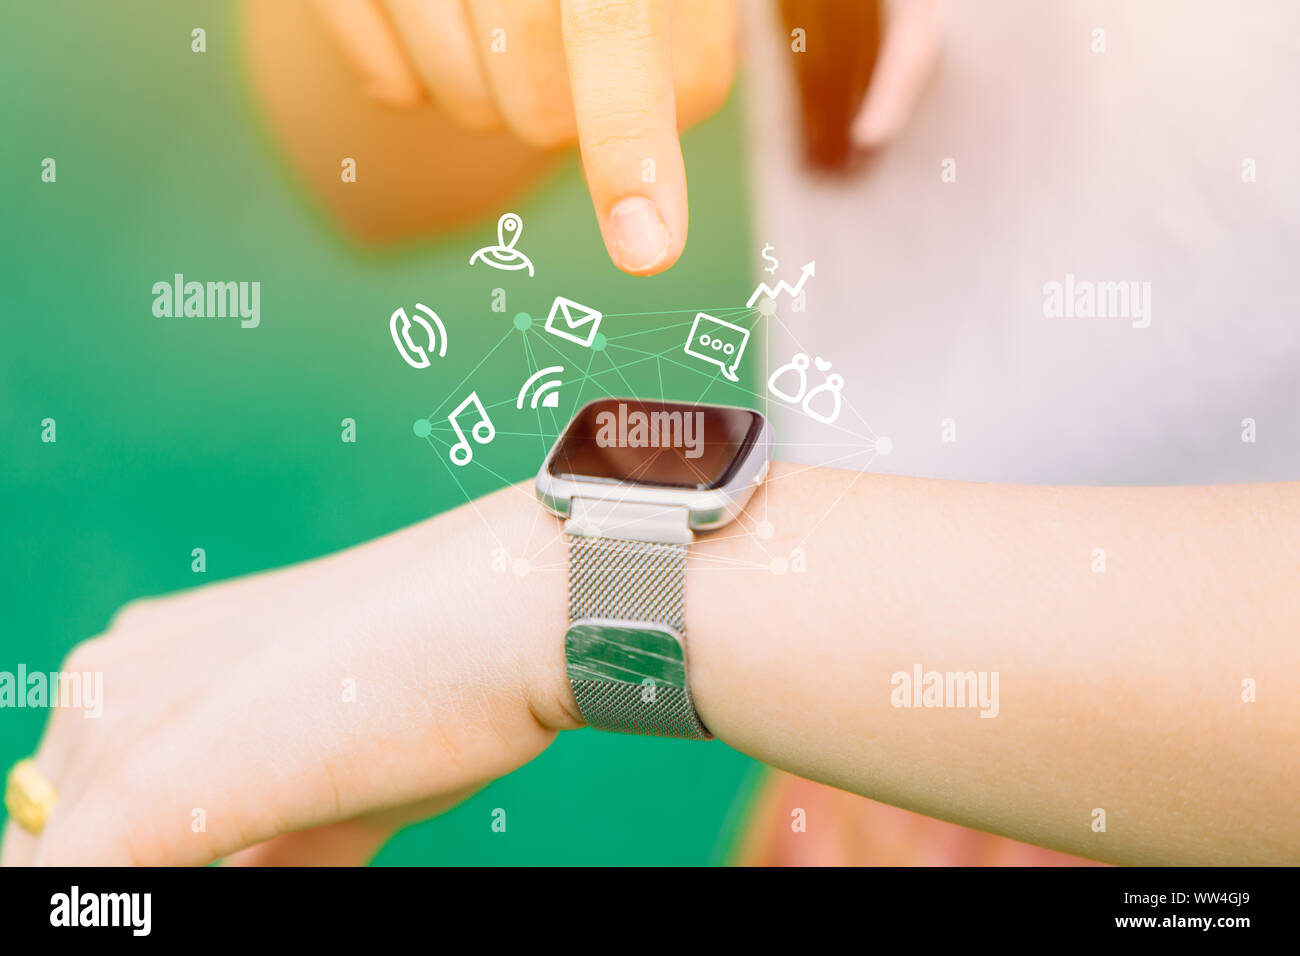 close-up people hand using smart watch in modern lifestyle convenience technology Stock Photo